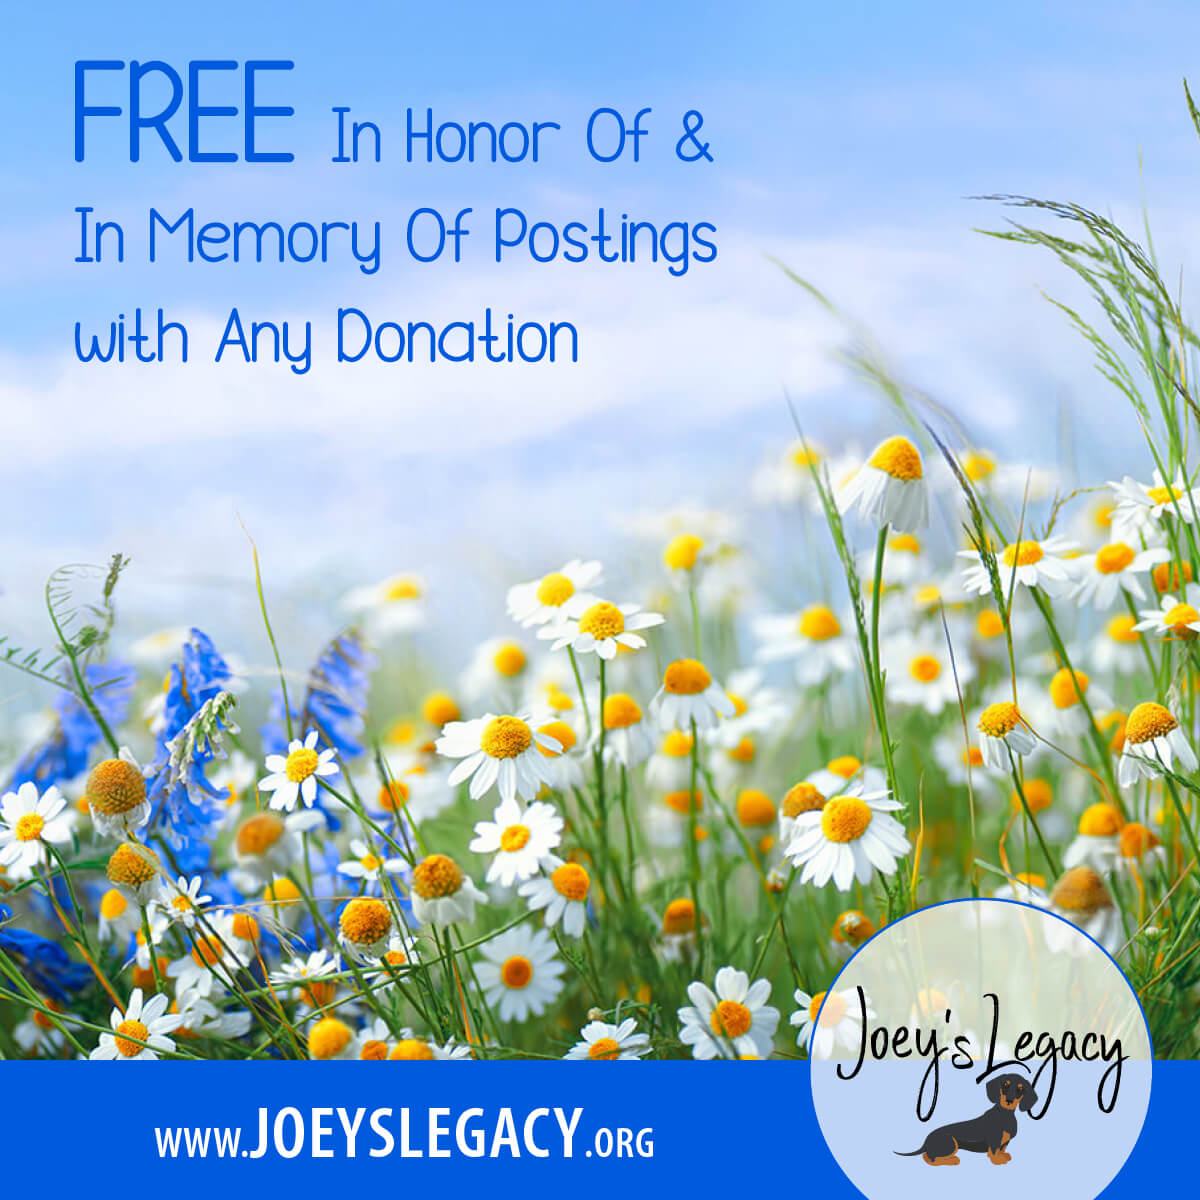 Joey's Legacy Social Media Post Free in honor of and in memory of postings with any donation